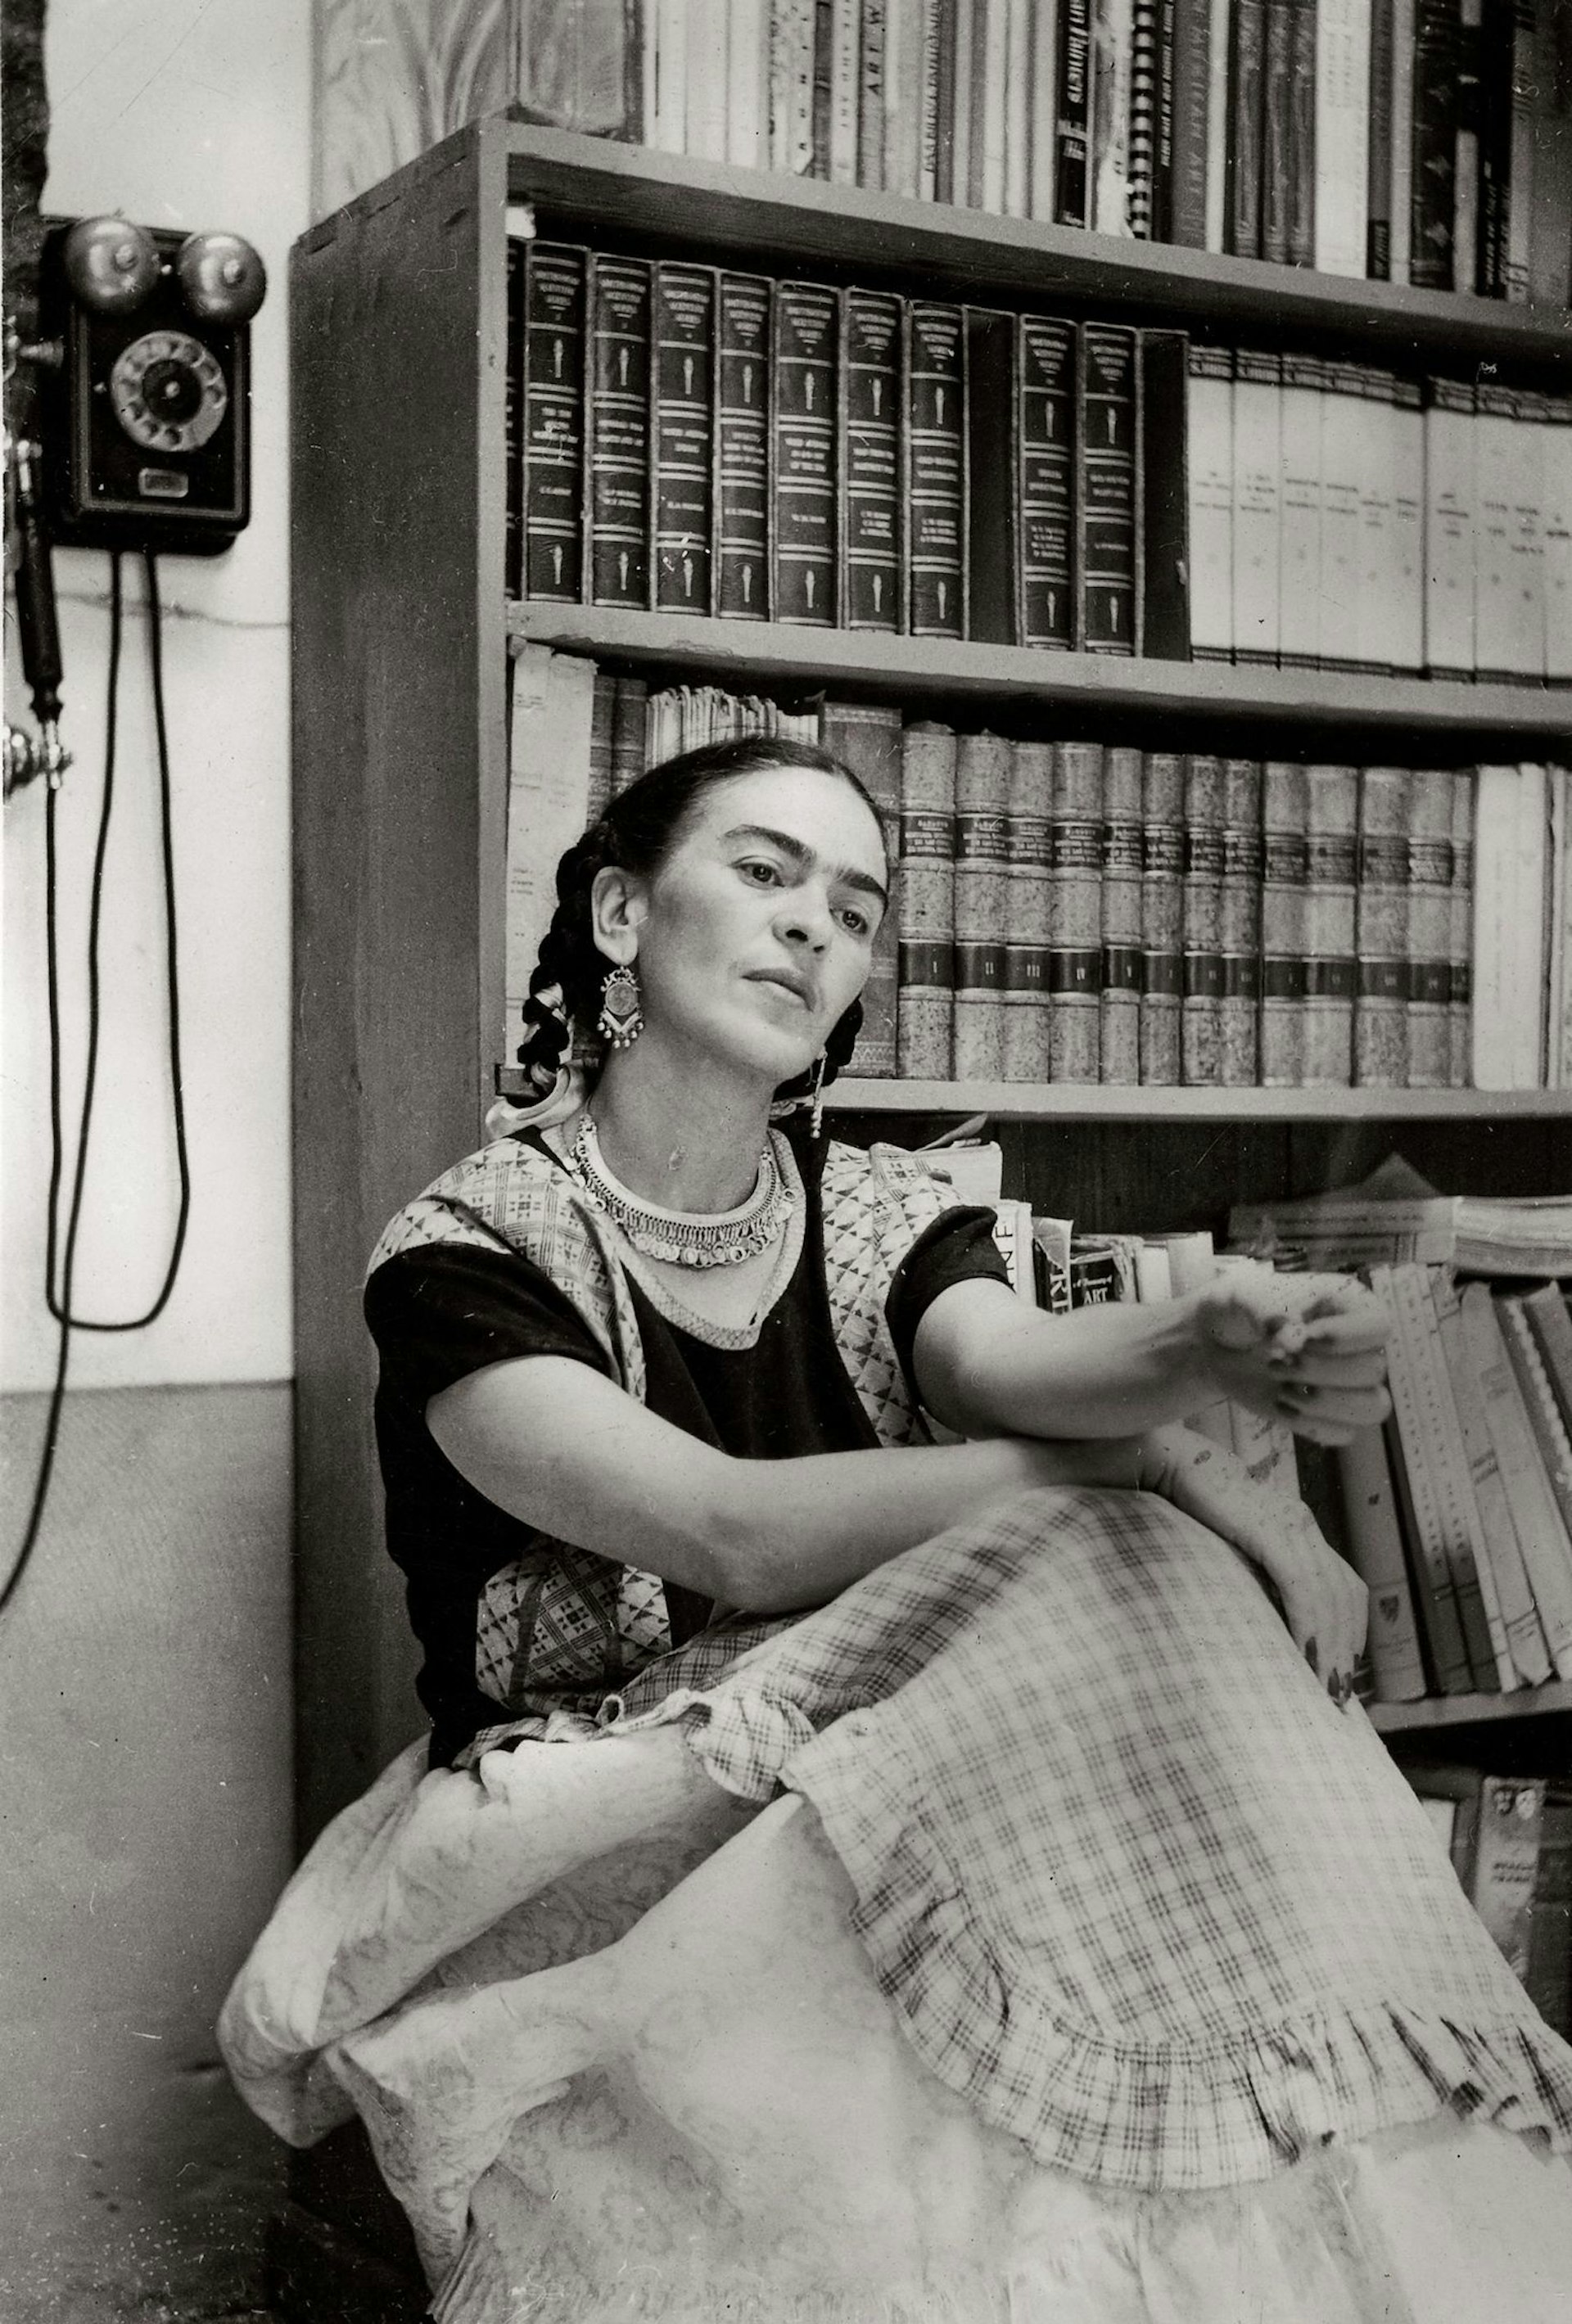 The role of photography in the life of Frida Kahlo